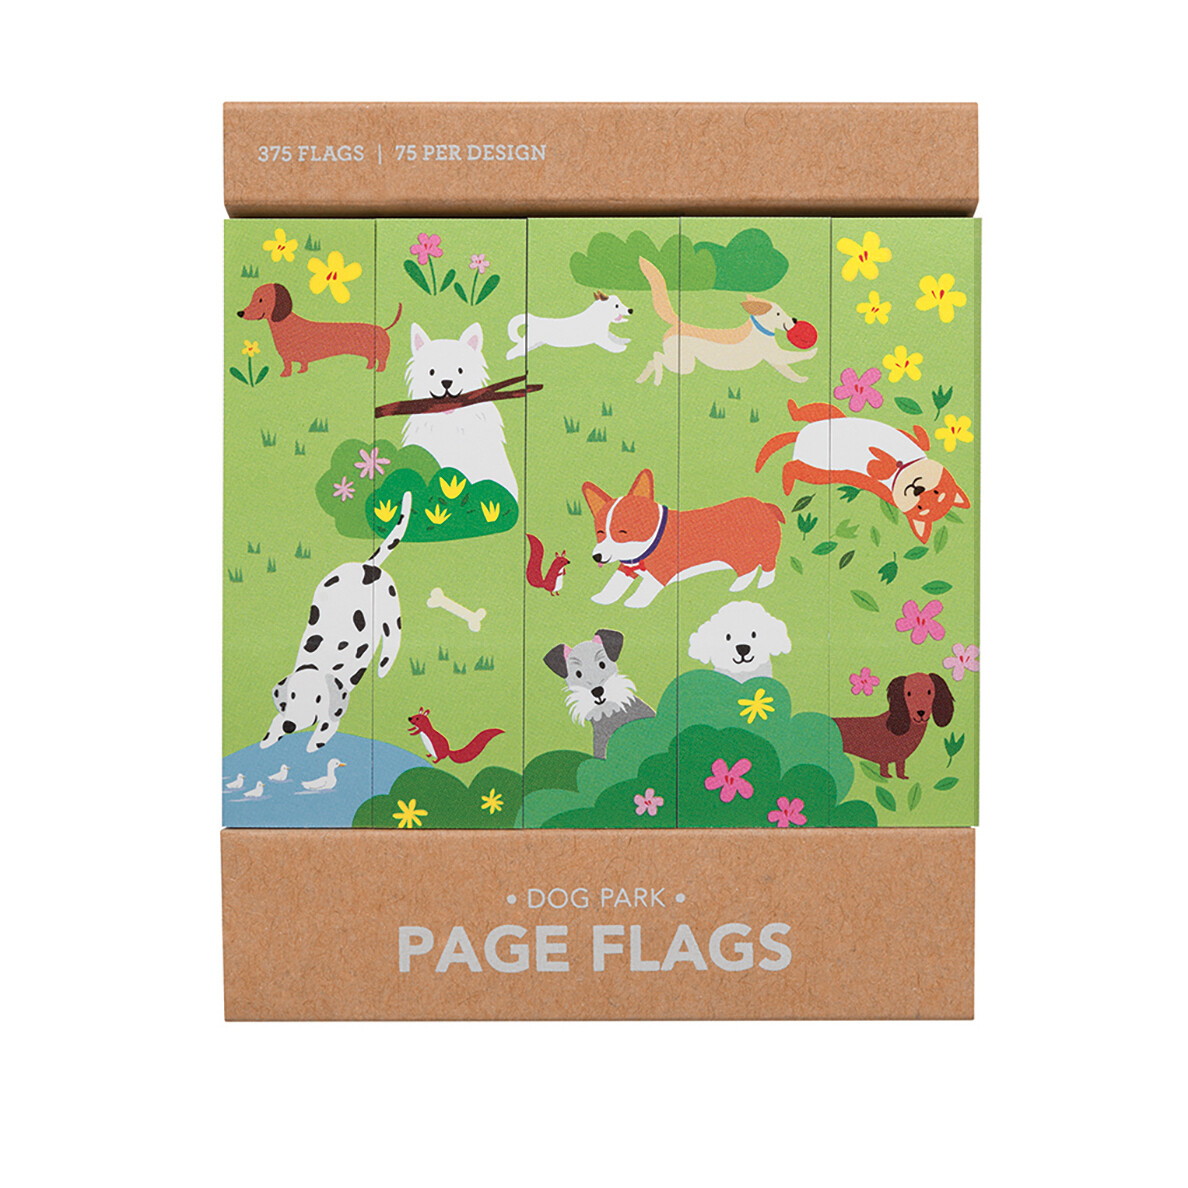 PAGE FLAGS - Dog Park